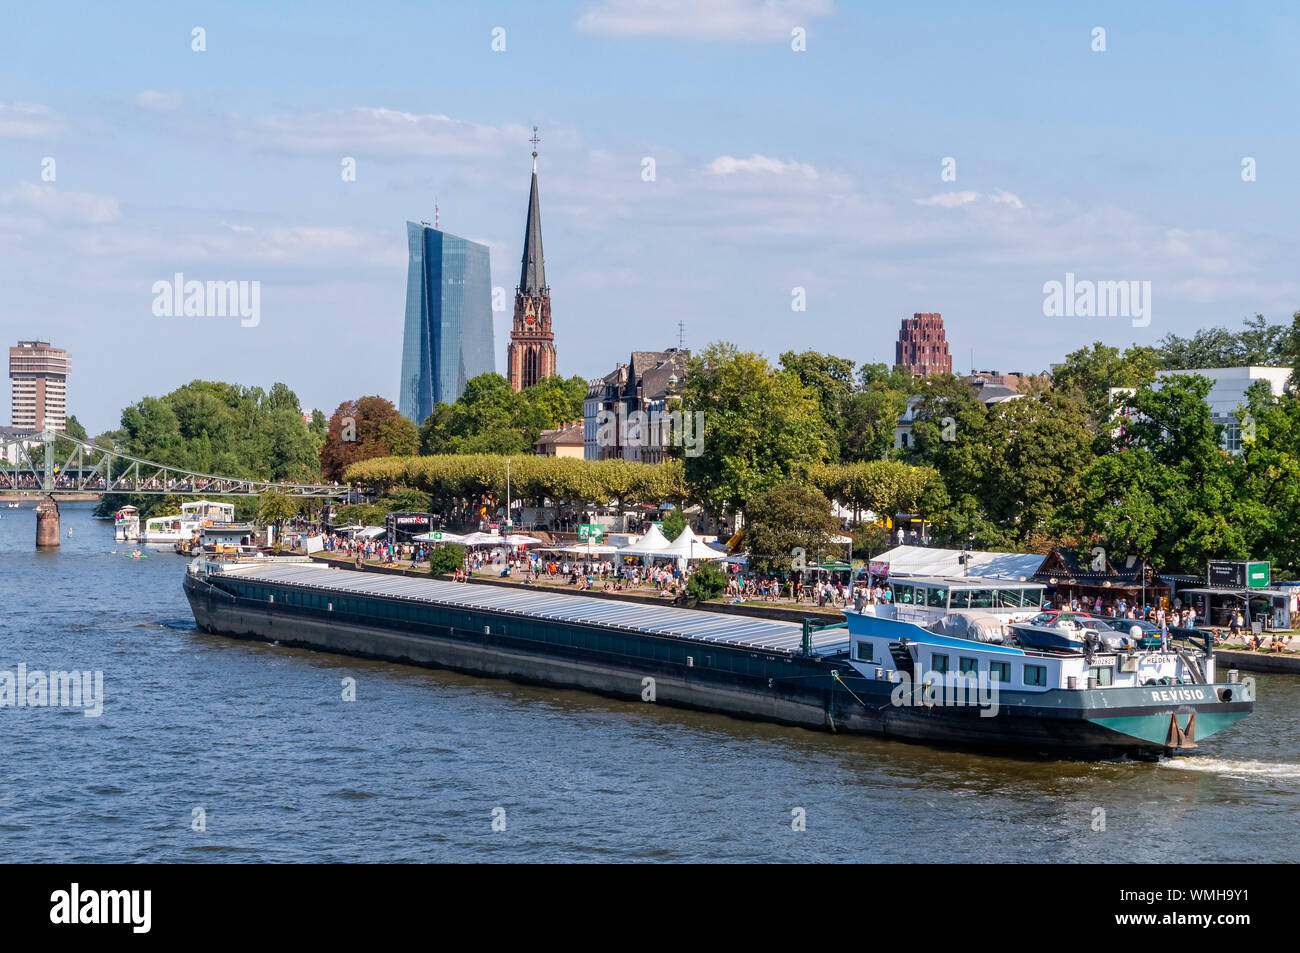 A cargo ship travels on the Main in Frankfurt with the European Central Bank (ECB) in the background Stock Photo